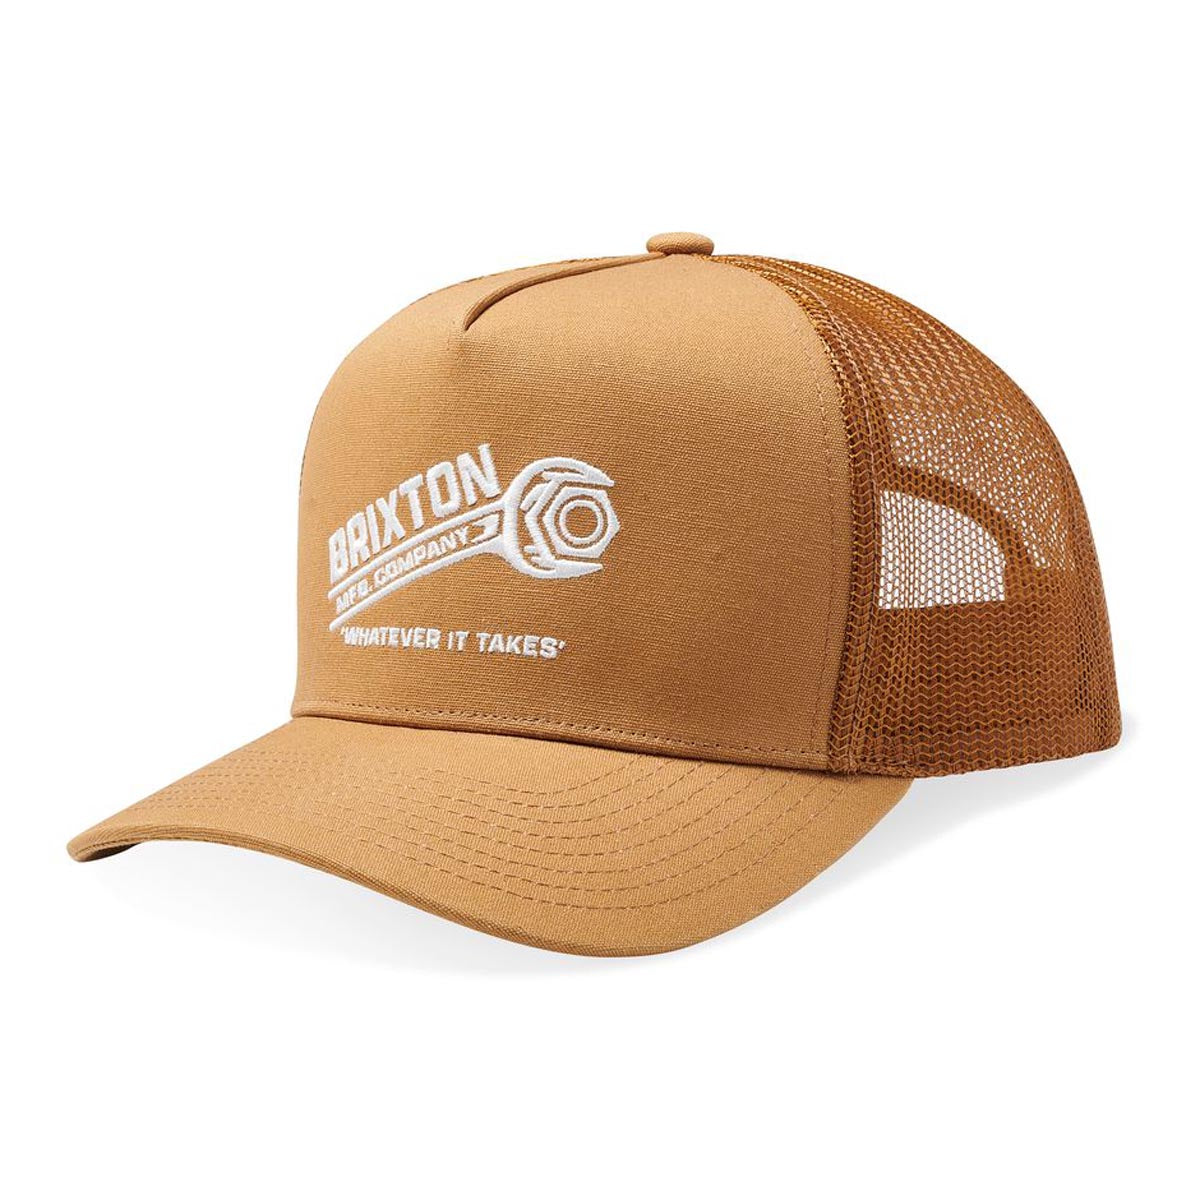 Brixton Wrench C Np Mp Trucker Hat - Copper/Copper image 1